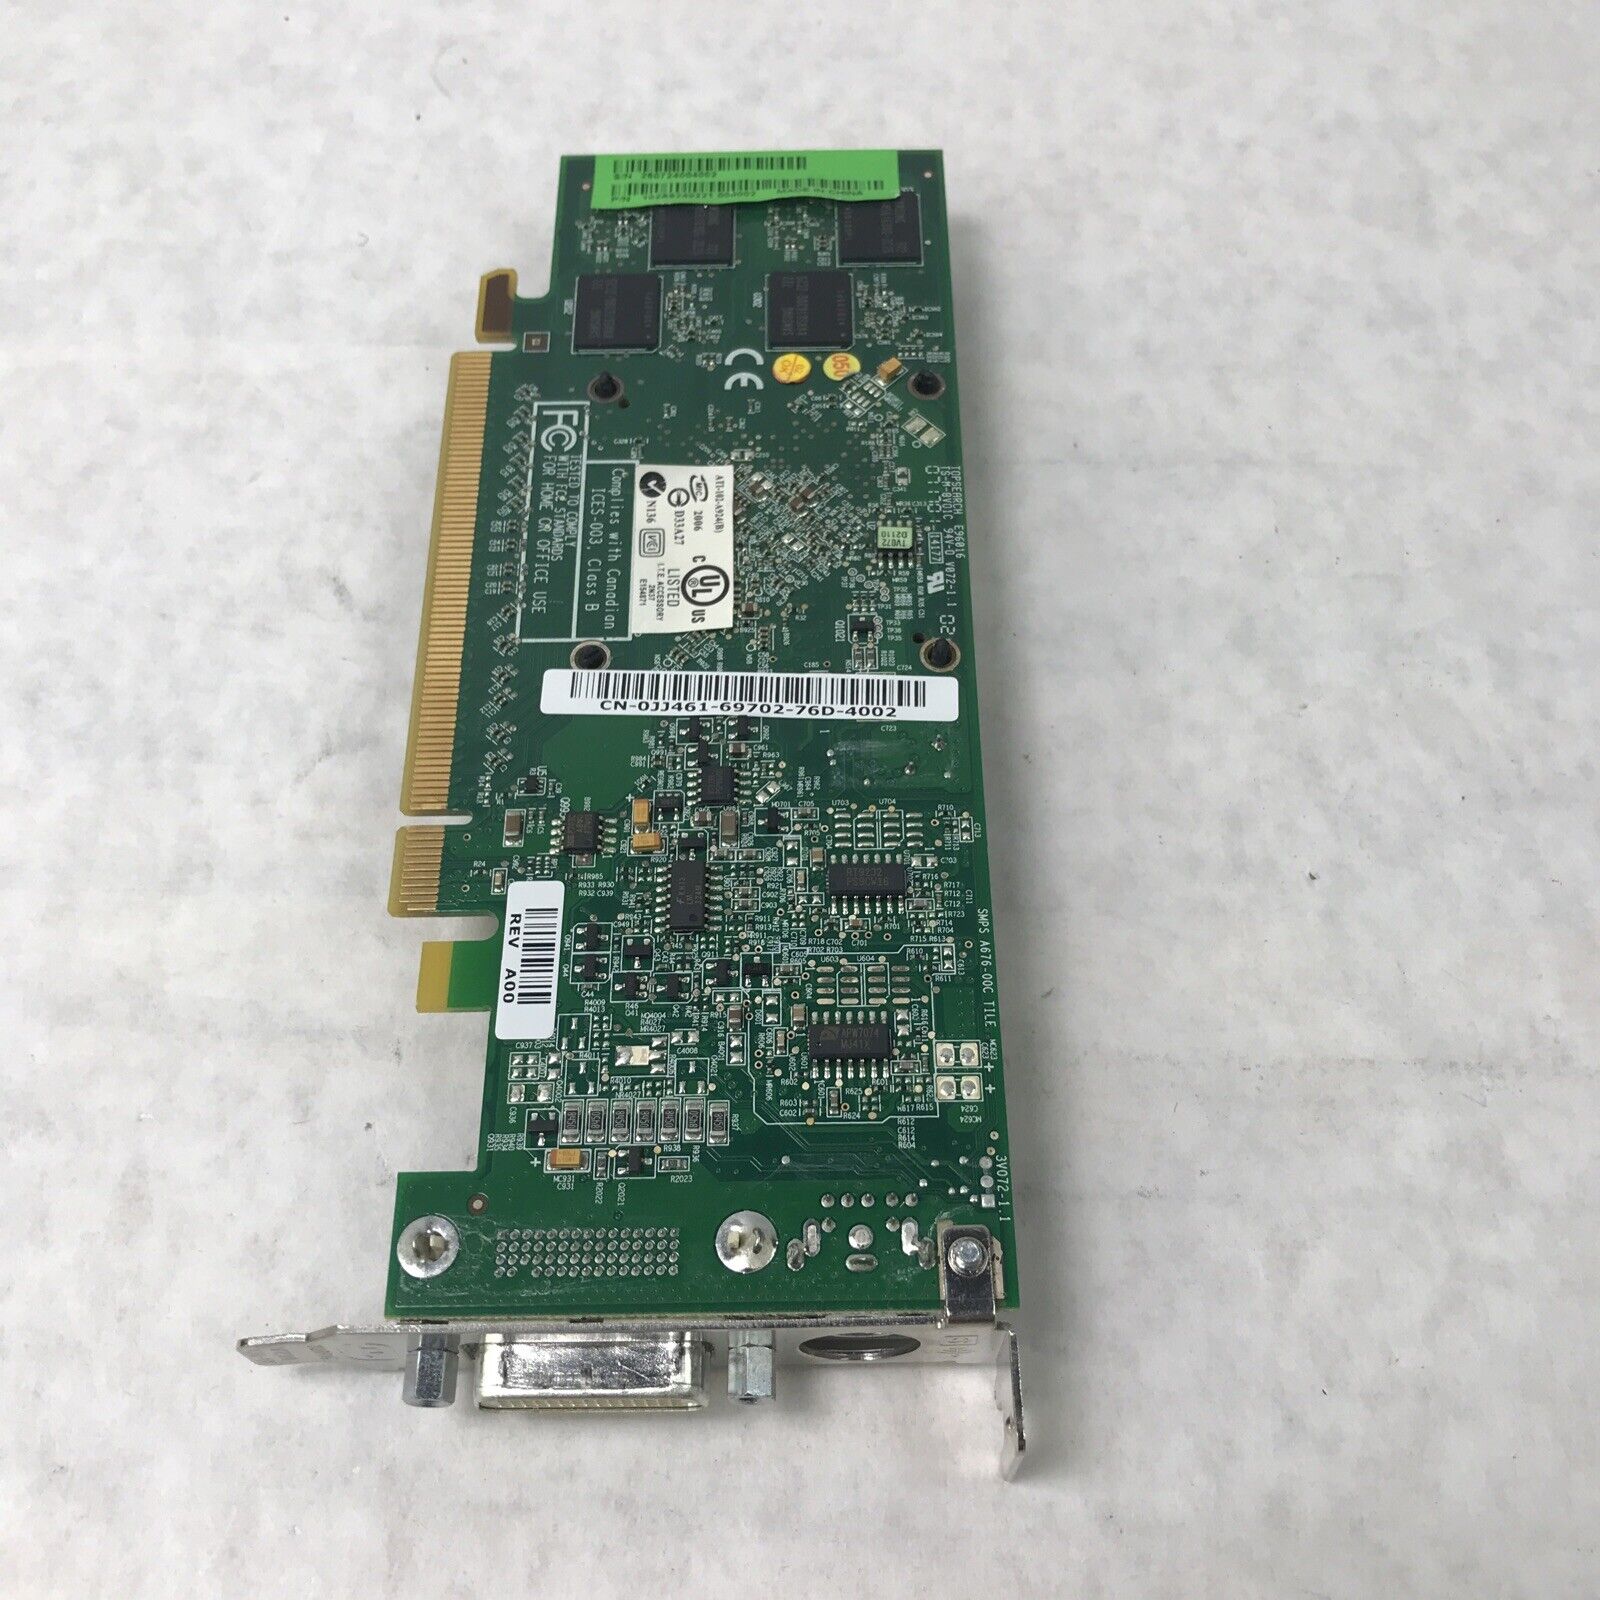 (Lot of 3) Dell ATI Radeon PCIe 256MB JJ461 KT154 Video Card (Tested and Working